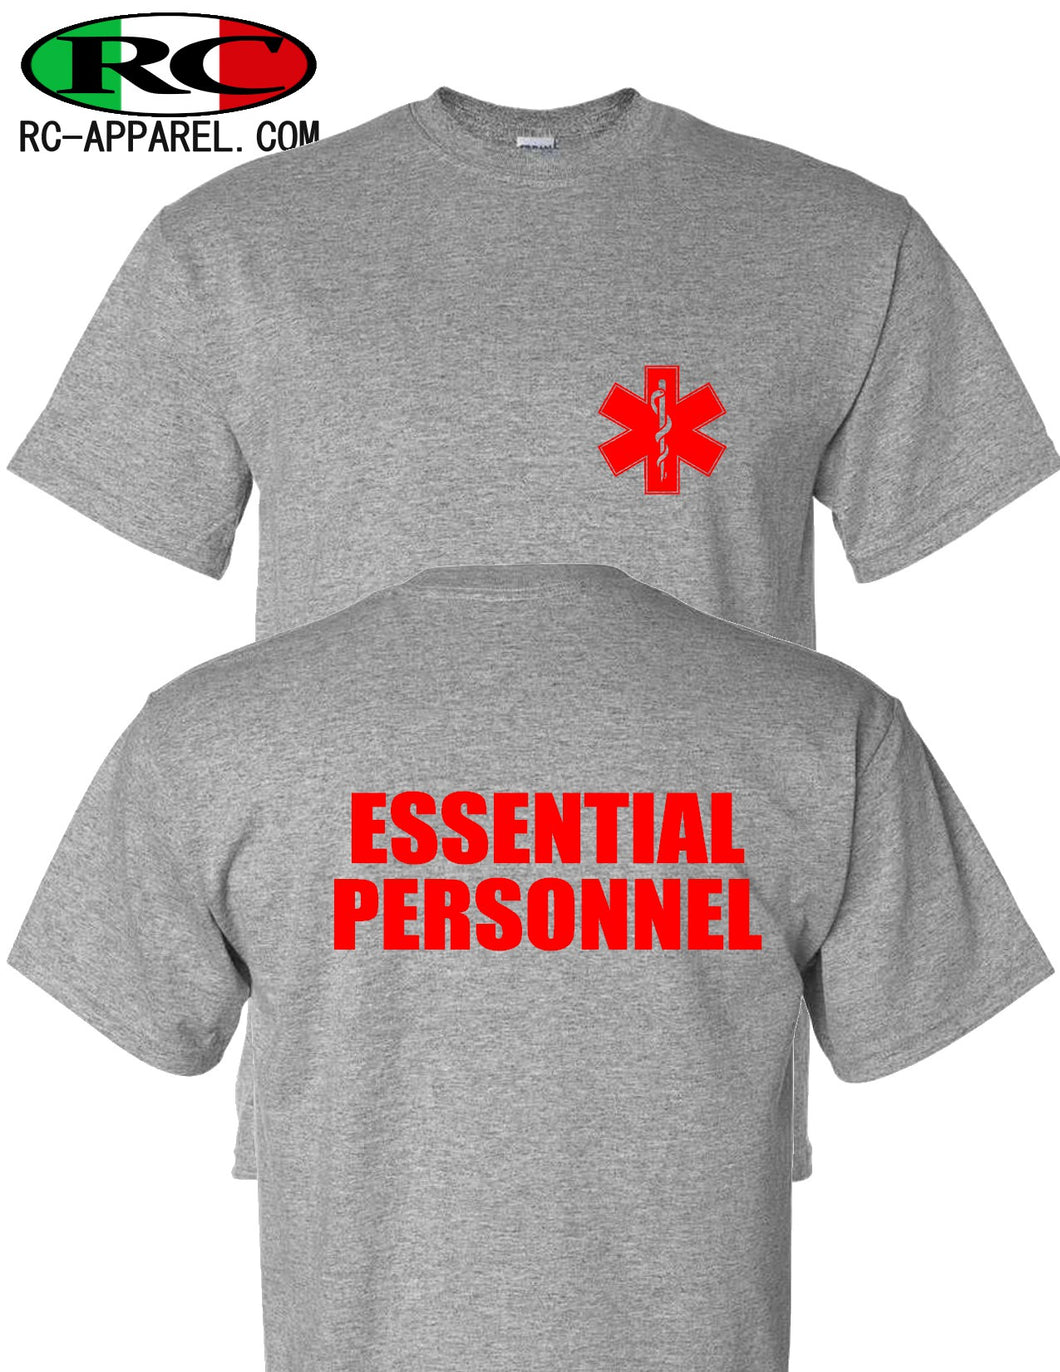 EMS - Essential Personnel T-Shirt